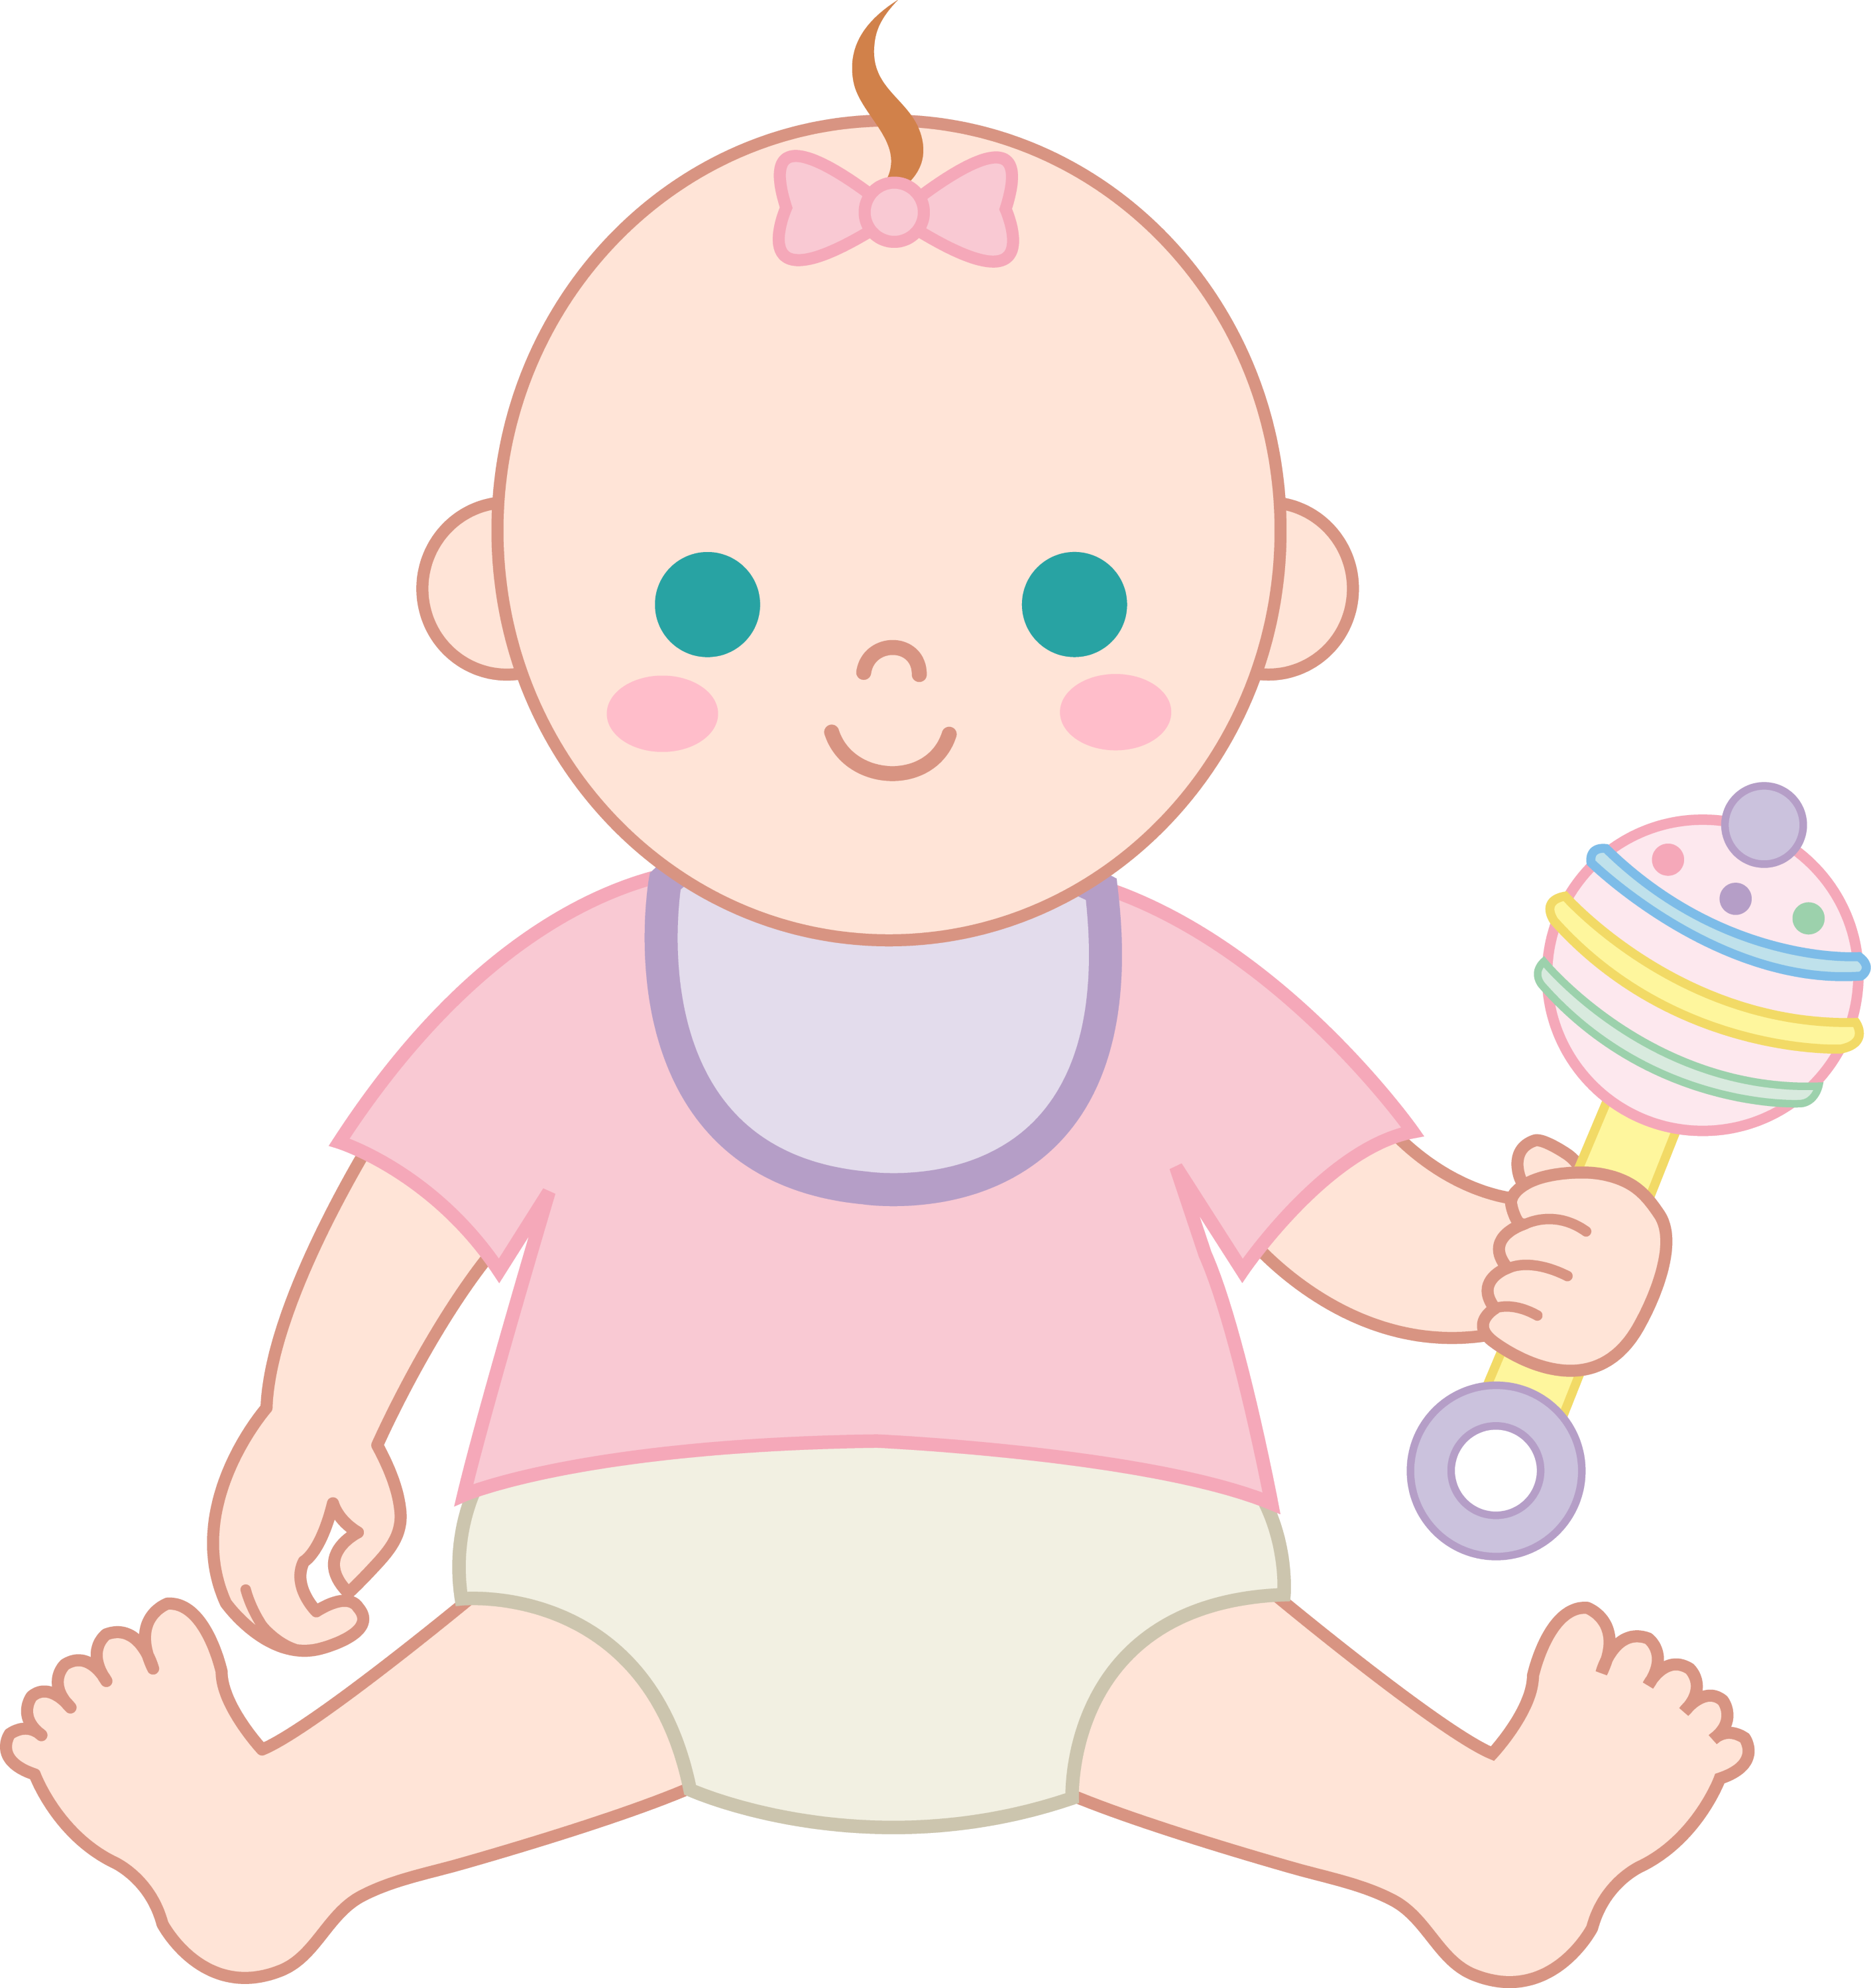 Baby Girl With Rattle - Free Clip Art